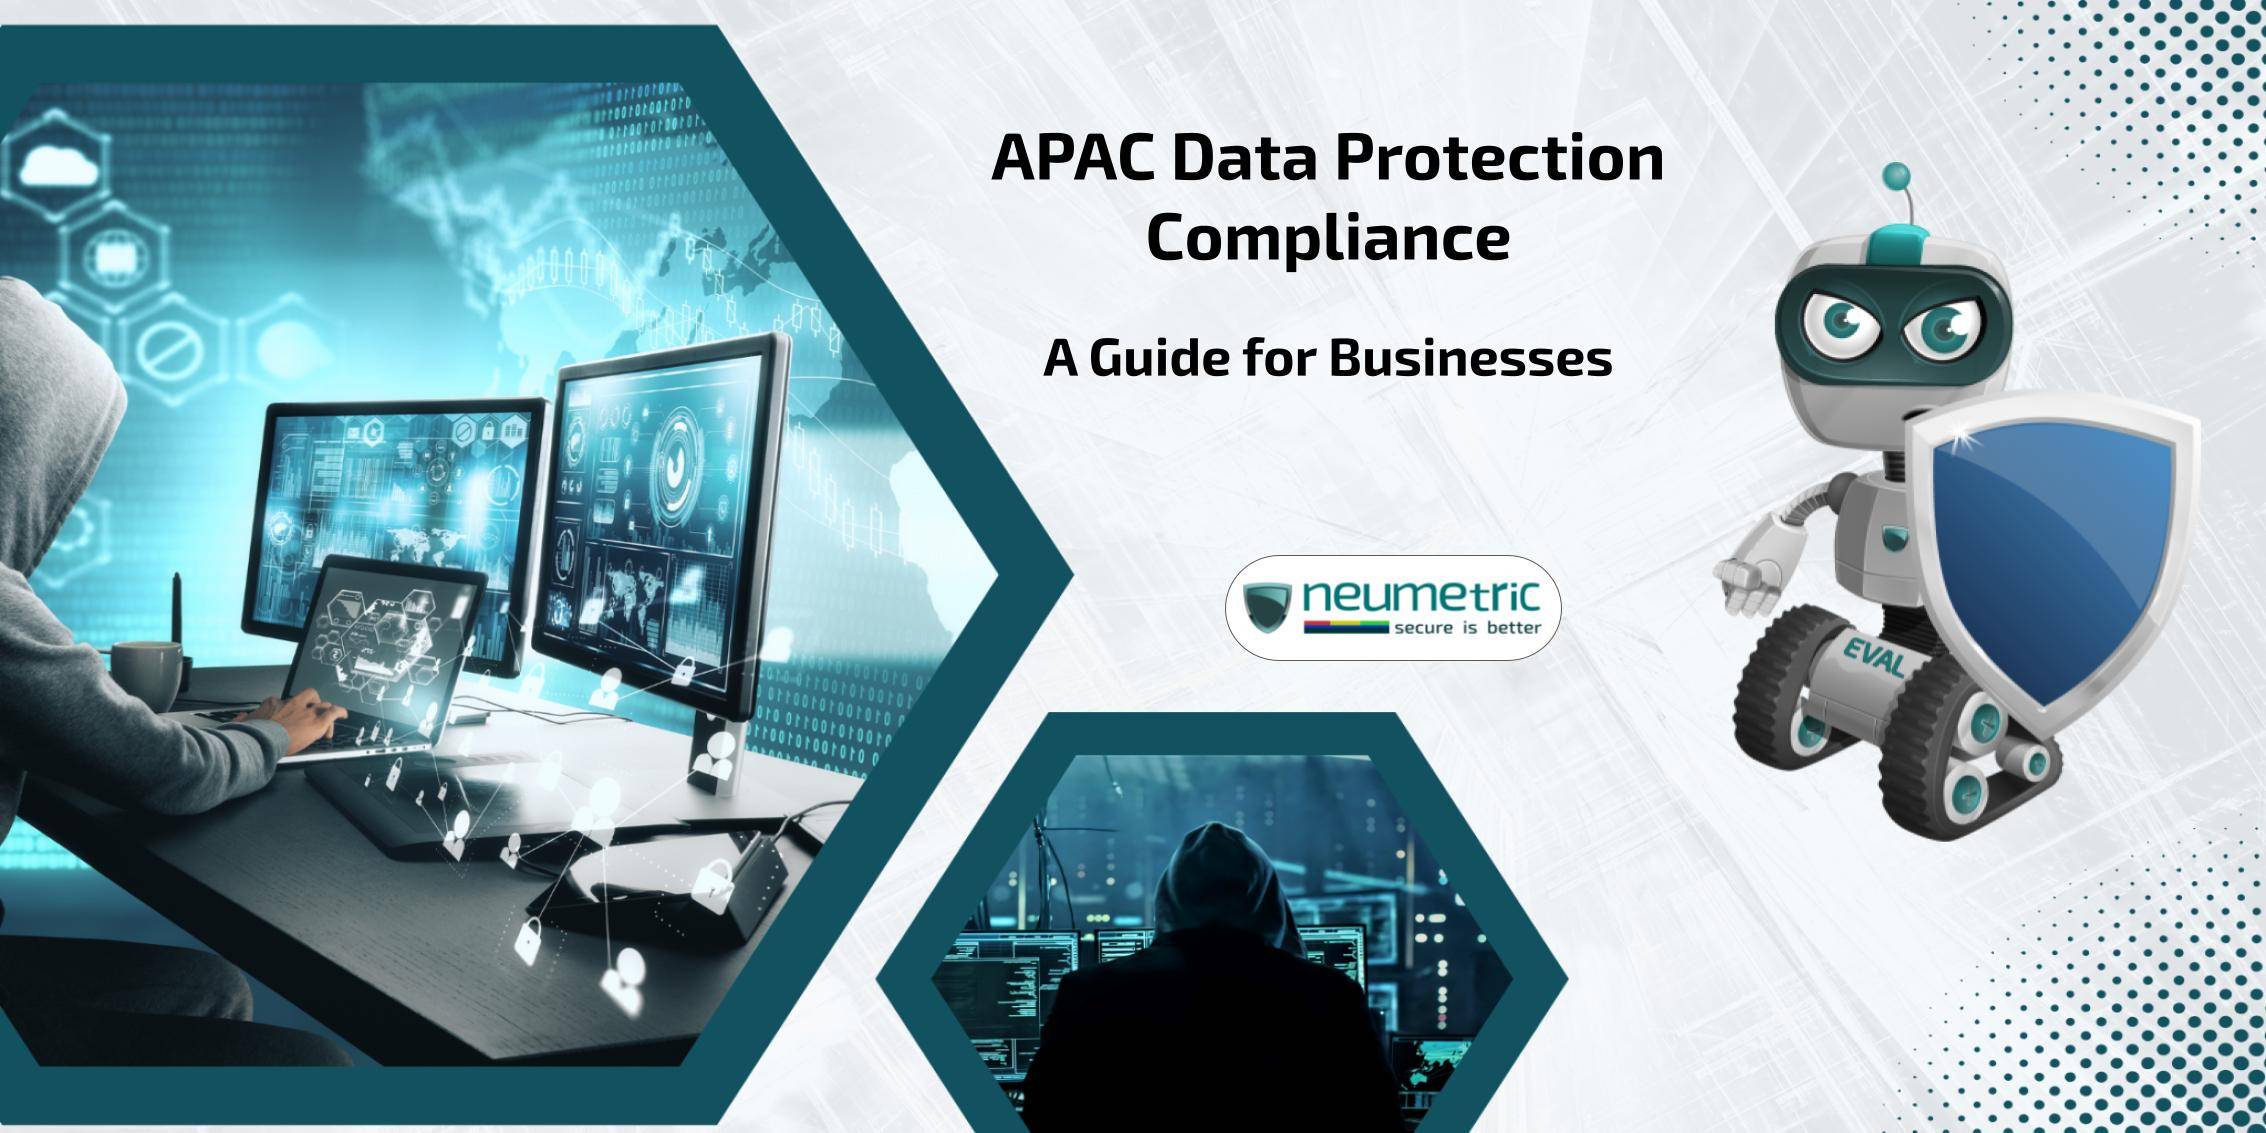 APAC Data Protection Compliance: A Guide for Businesses